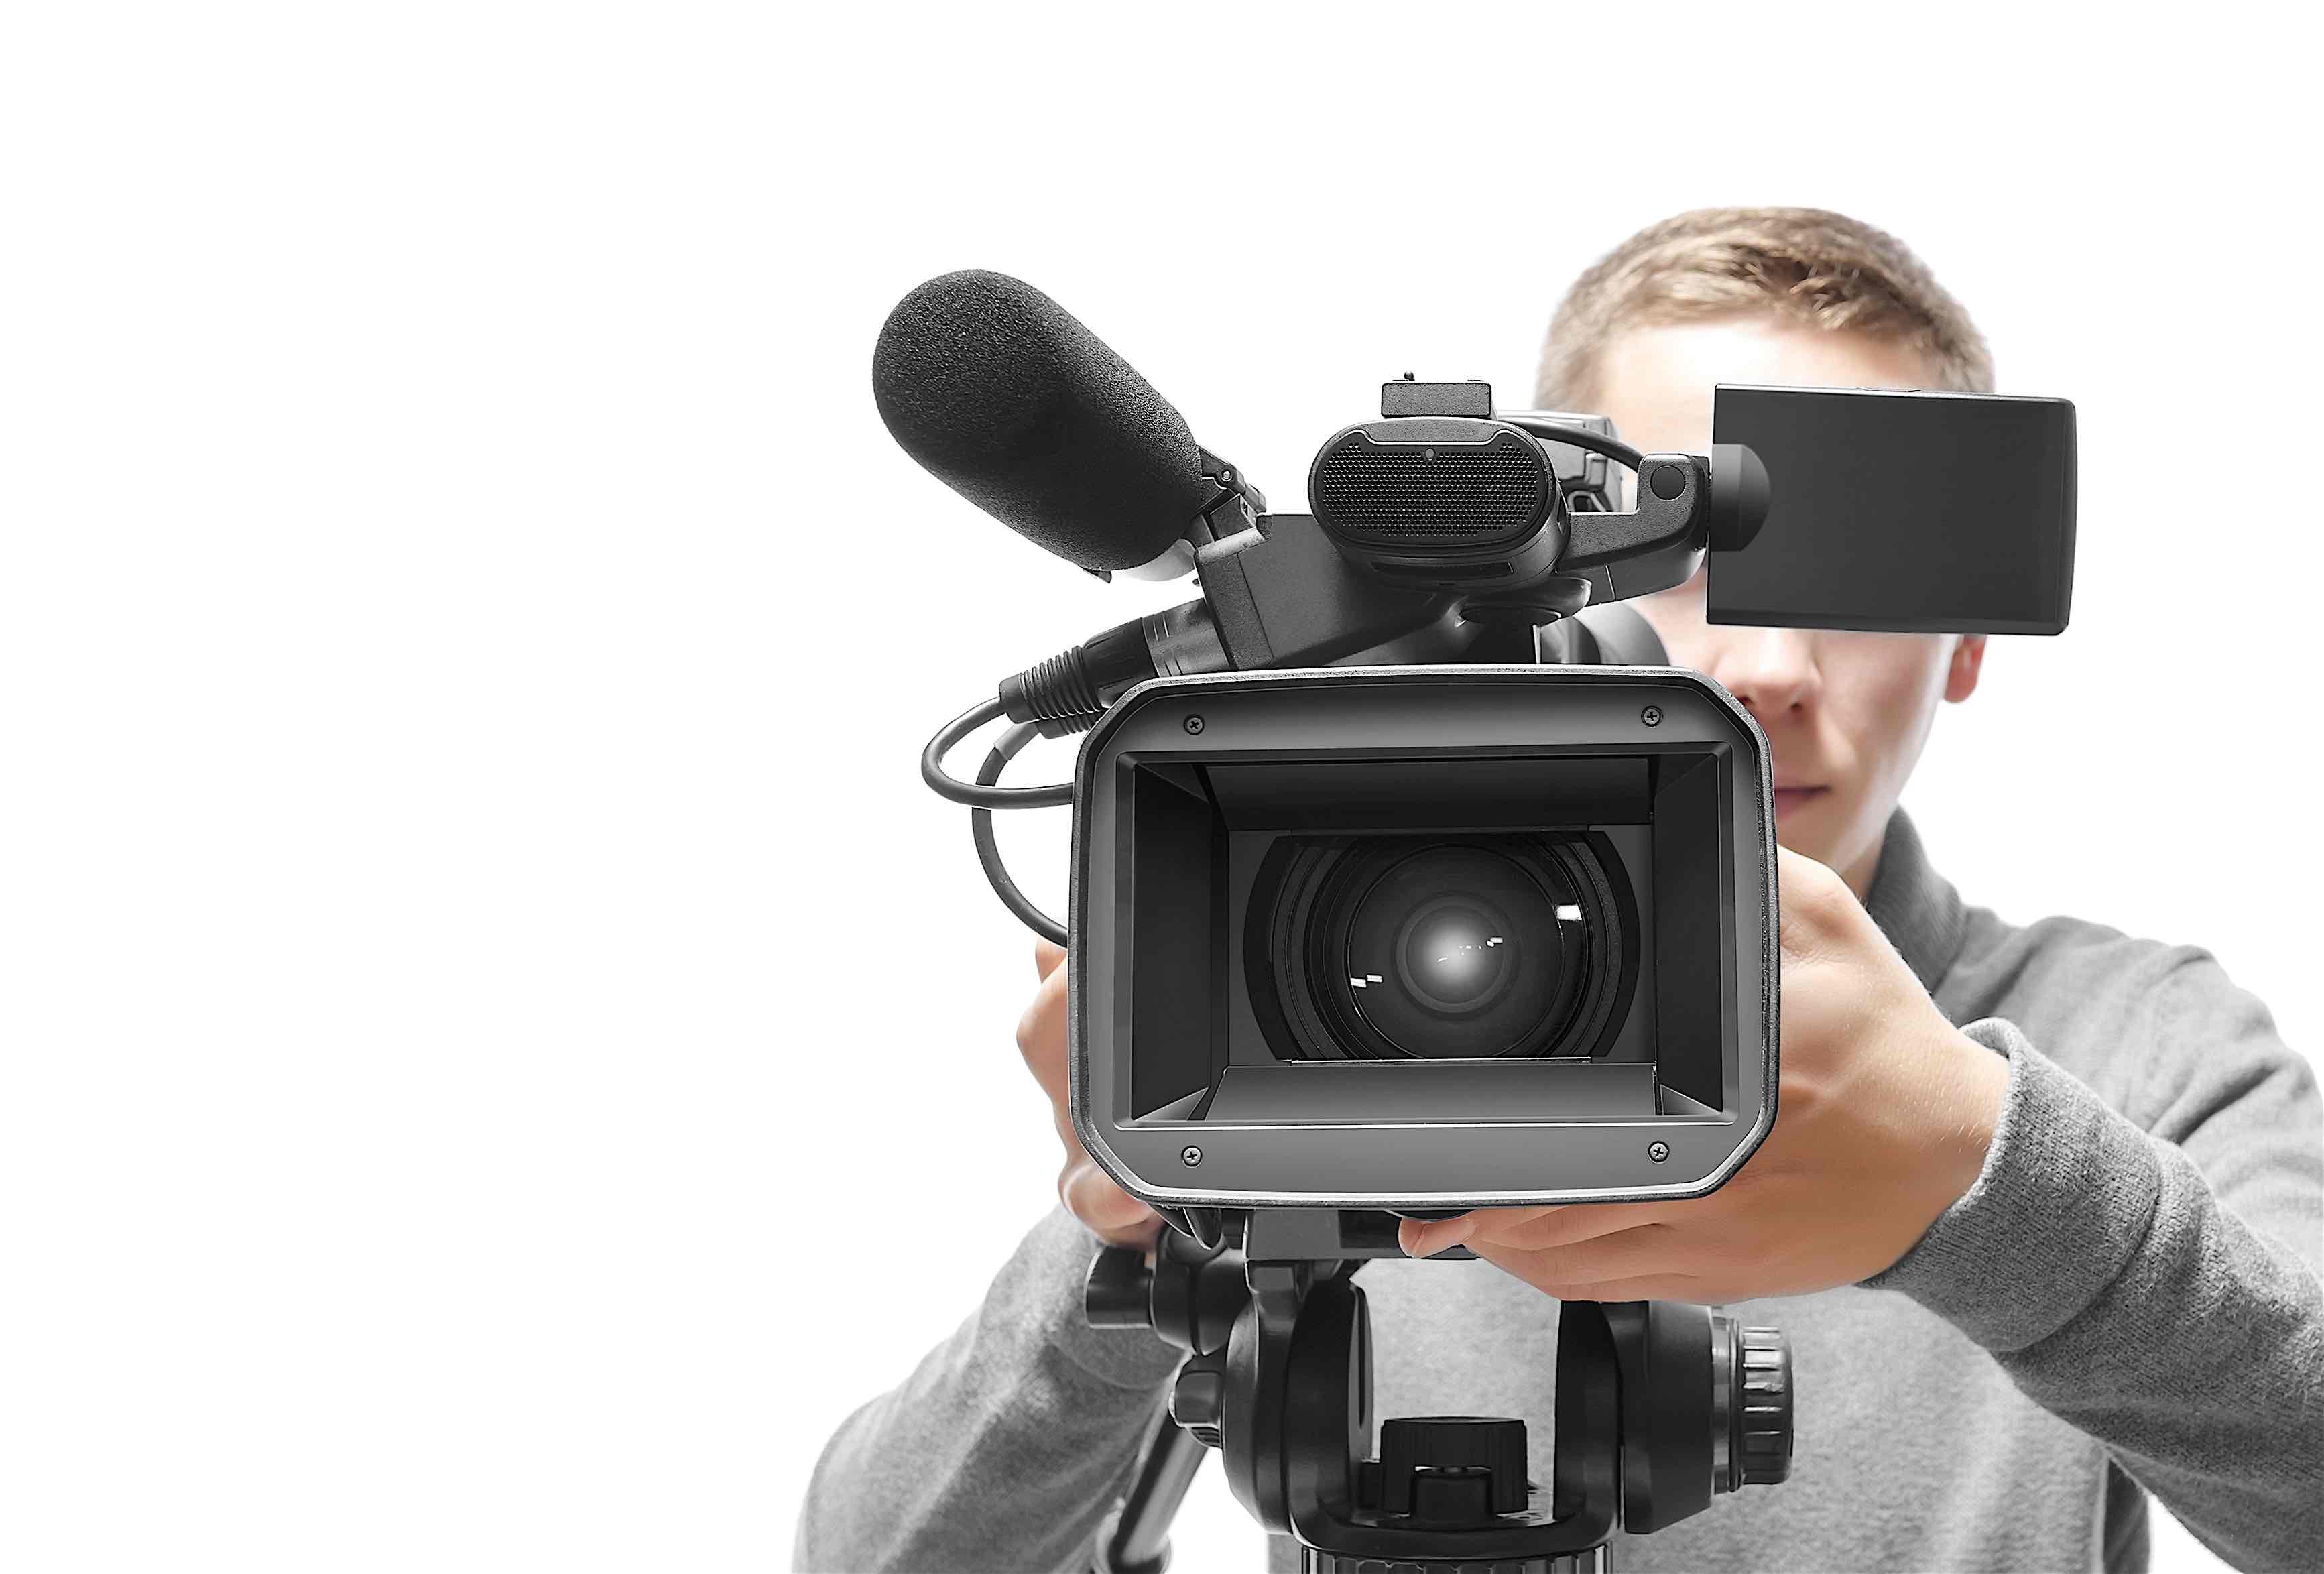 Seven Solid Ideas for Your Next Real Estate Video